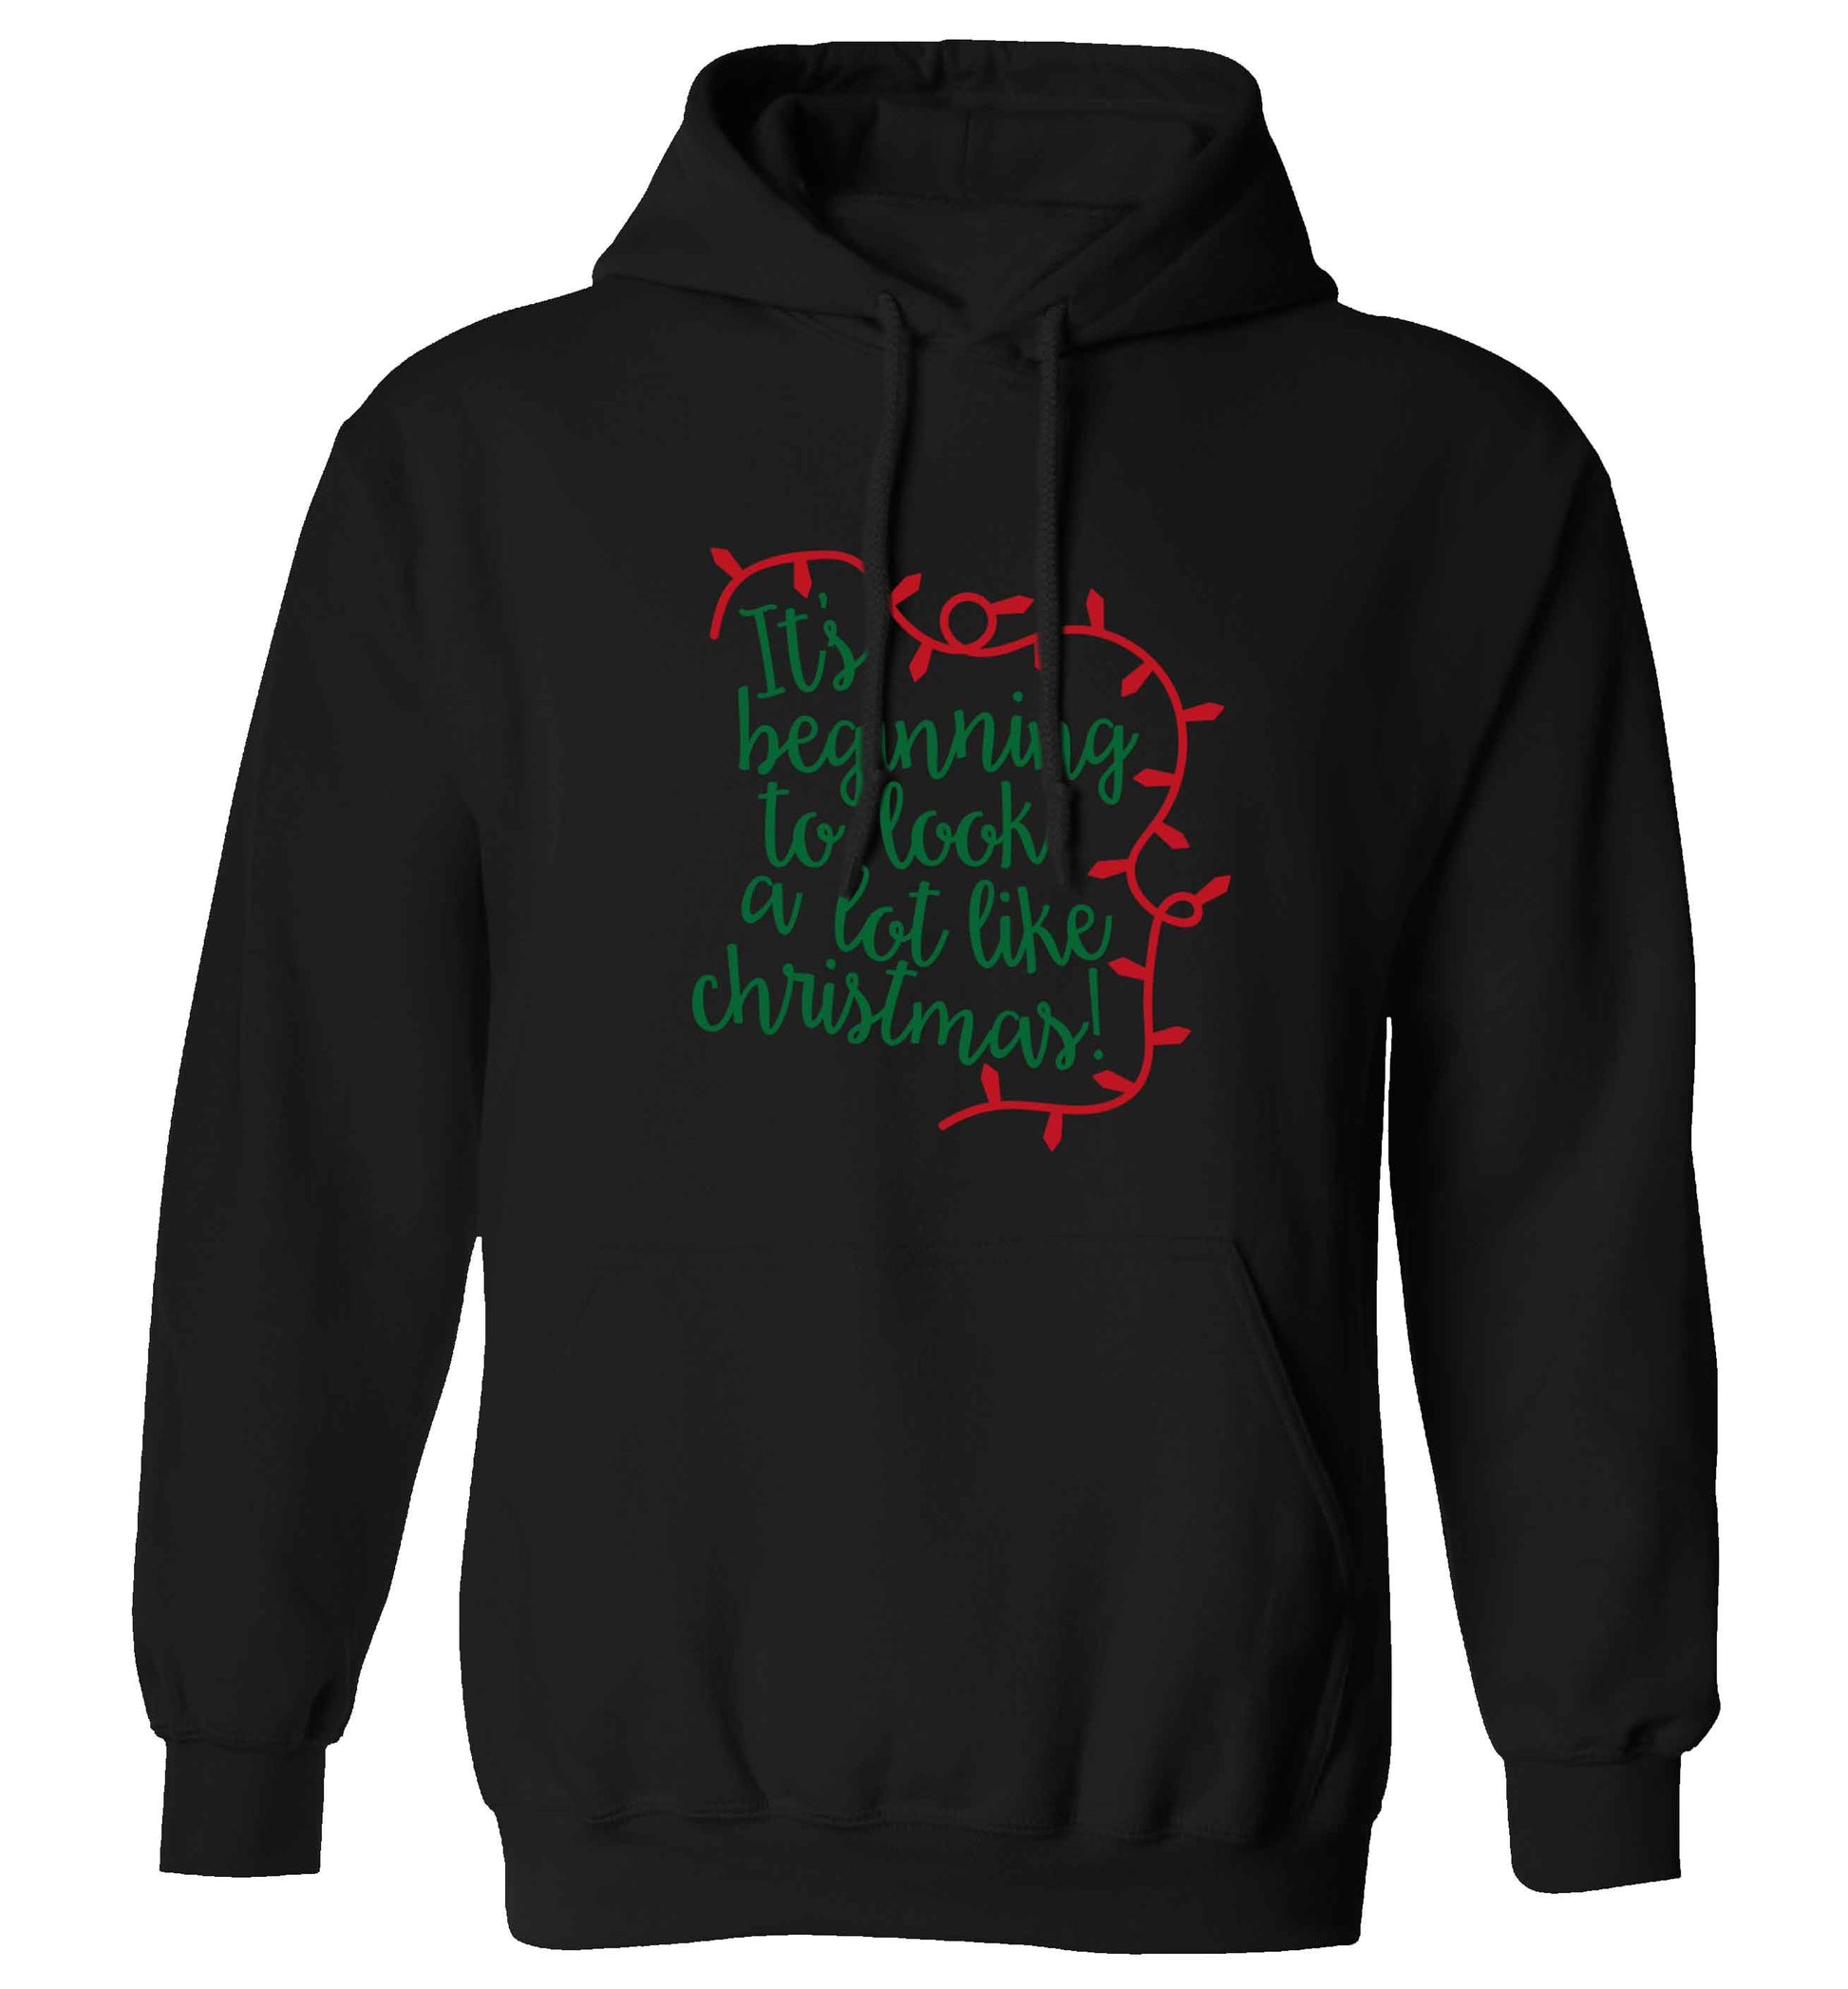 It's beginning to look a lot like Christmas adults unisex black hoodie 2XL